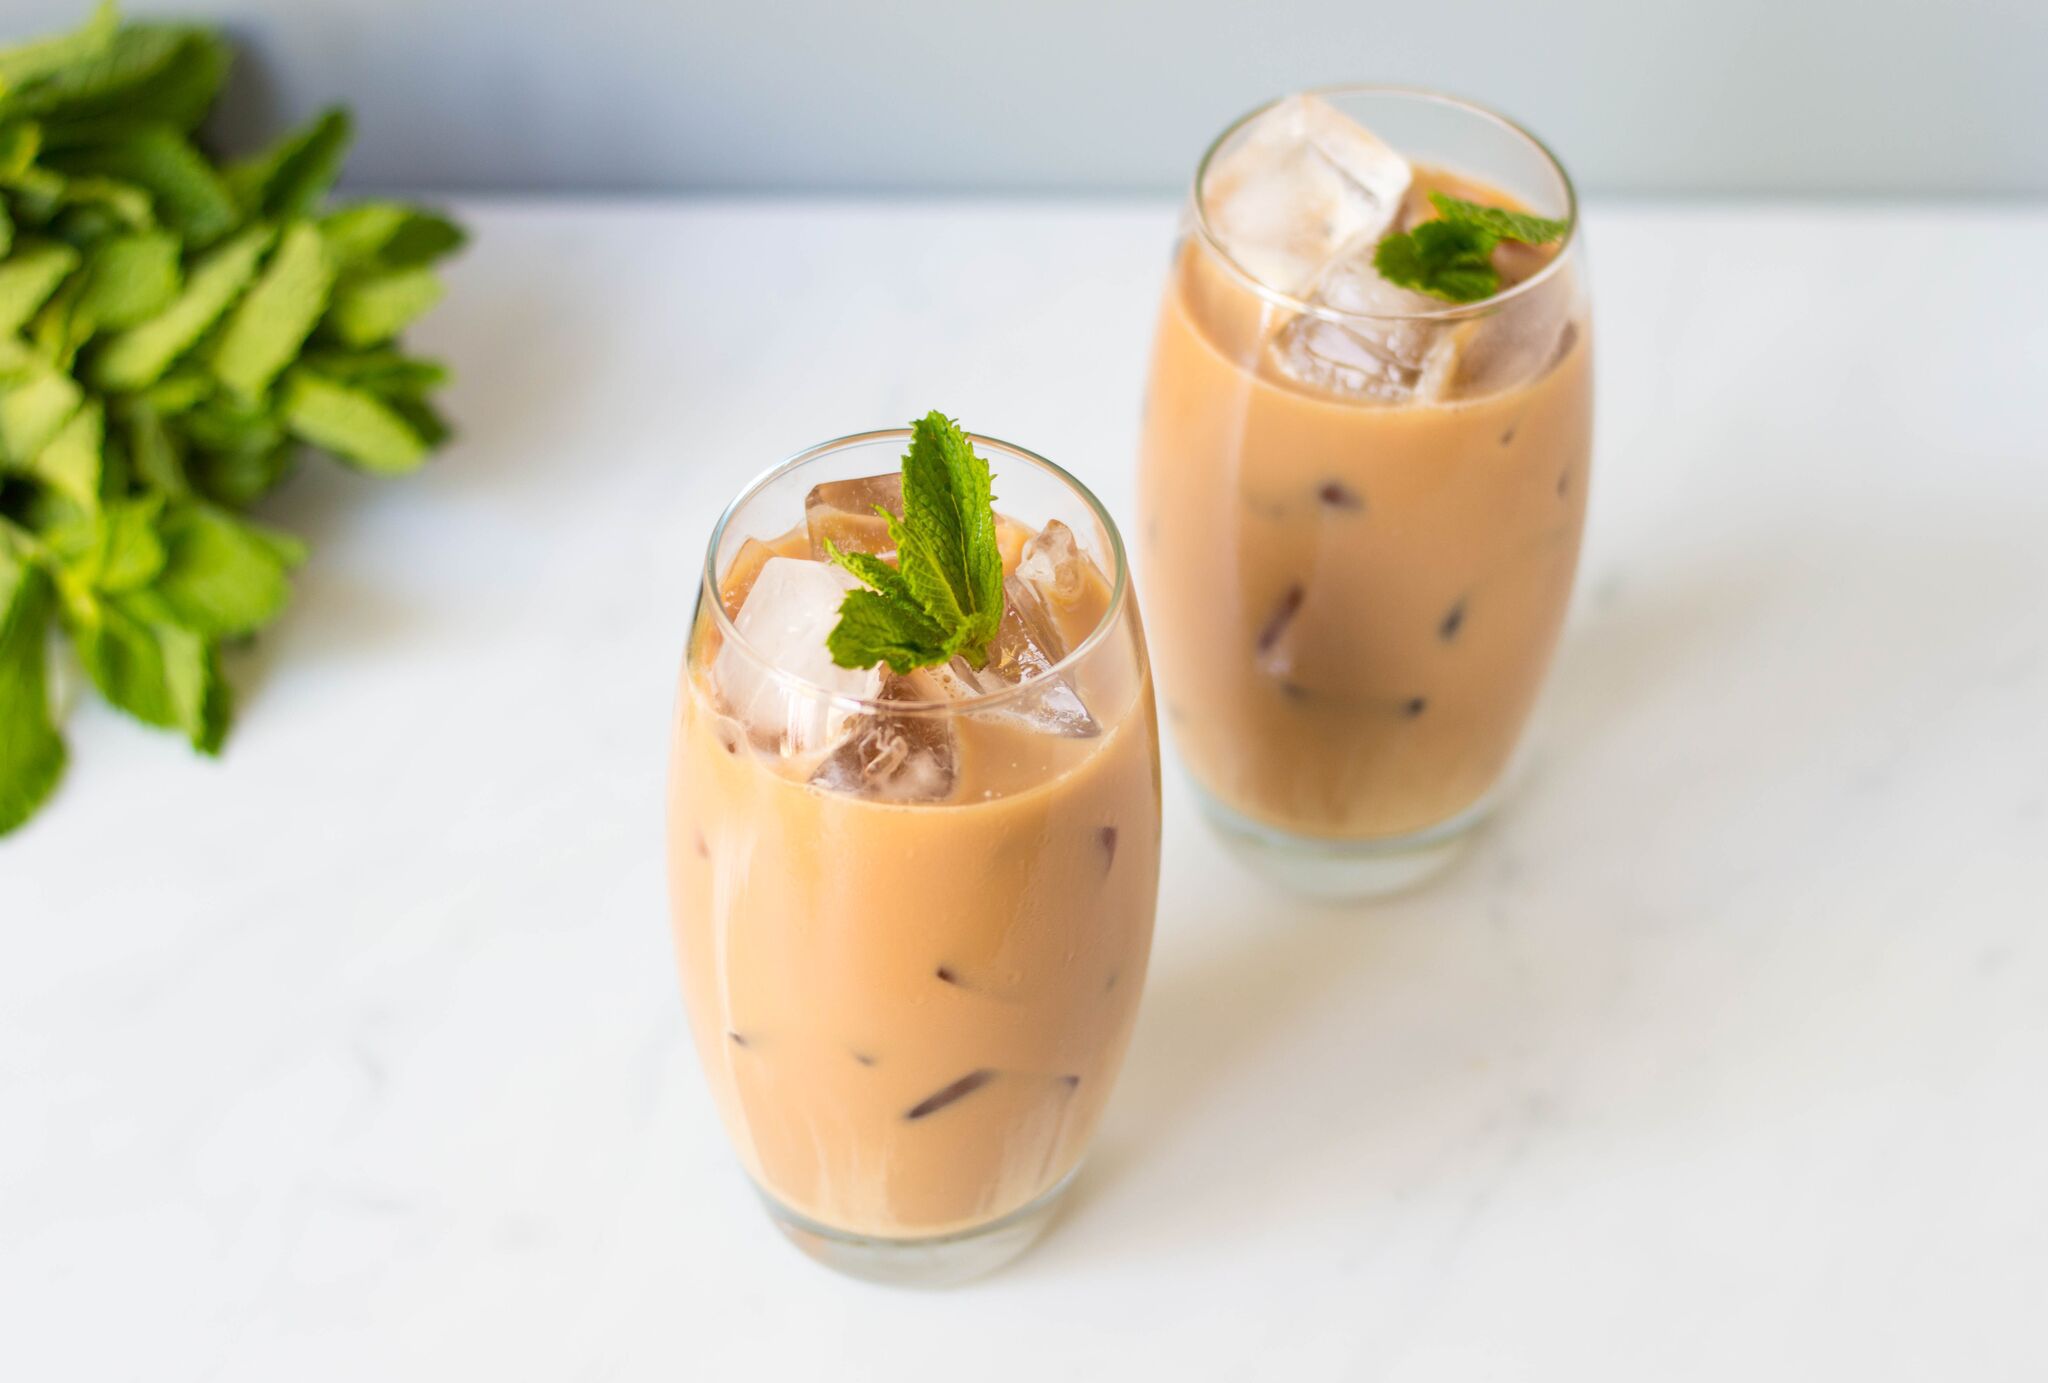 Thai Milk Tea - 6 Drinks You Should Try In Thailand